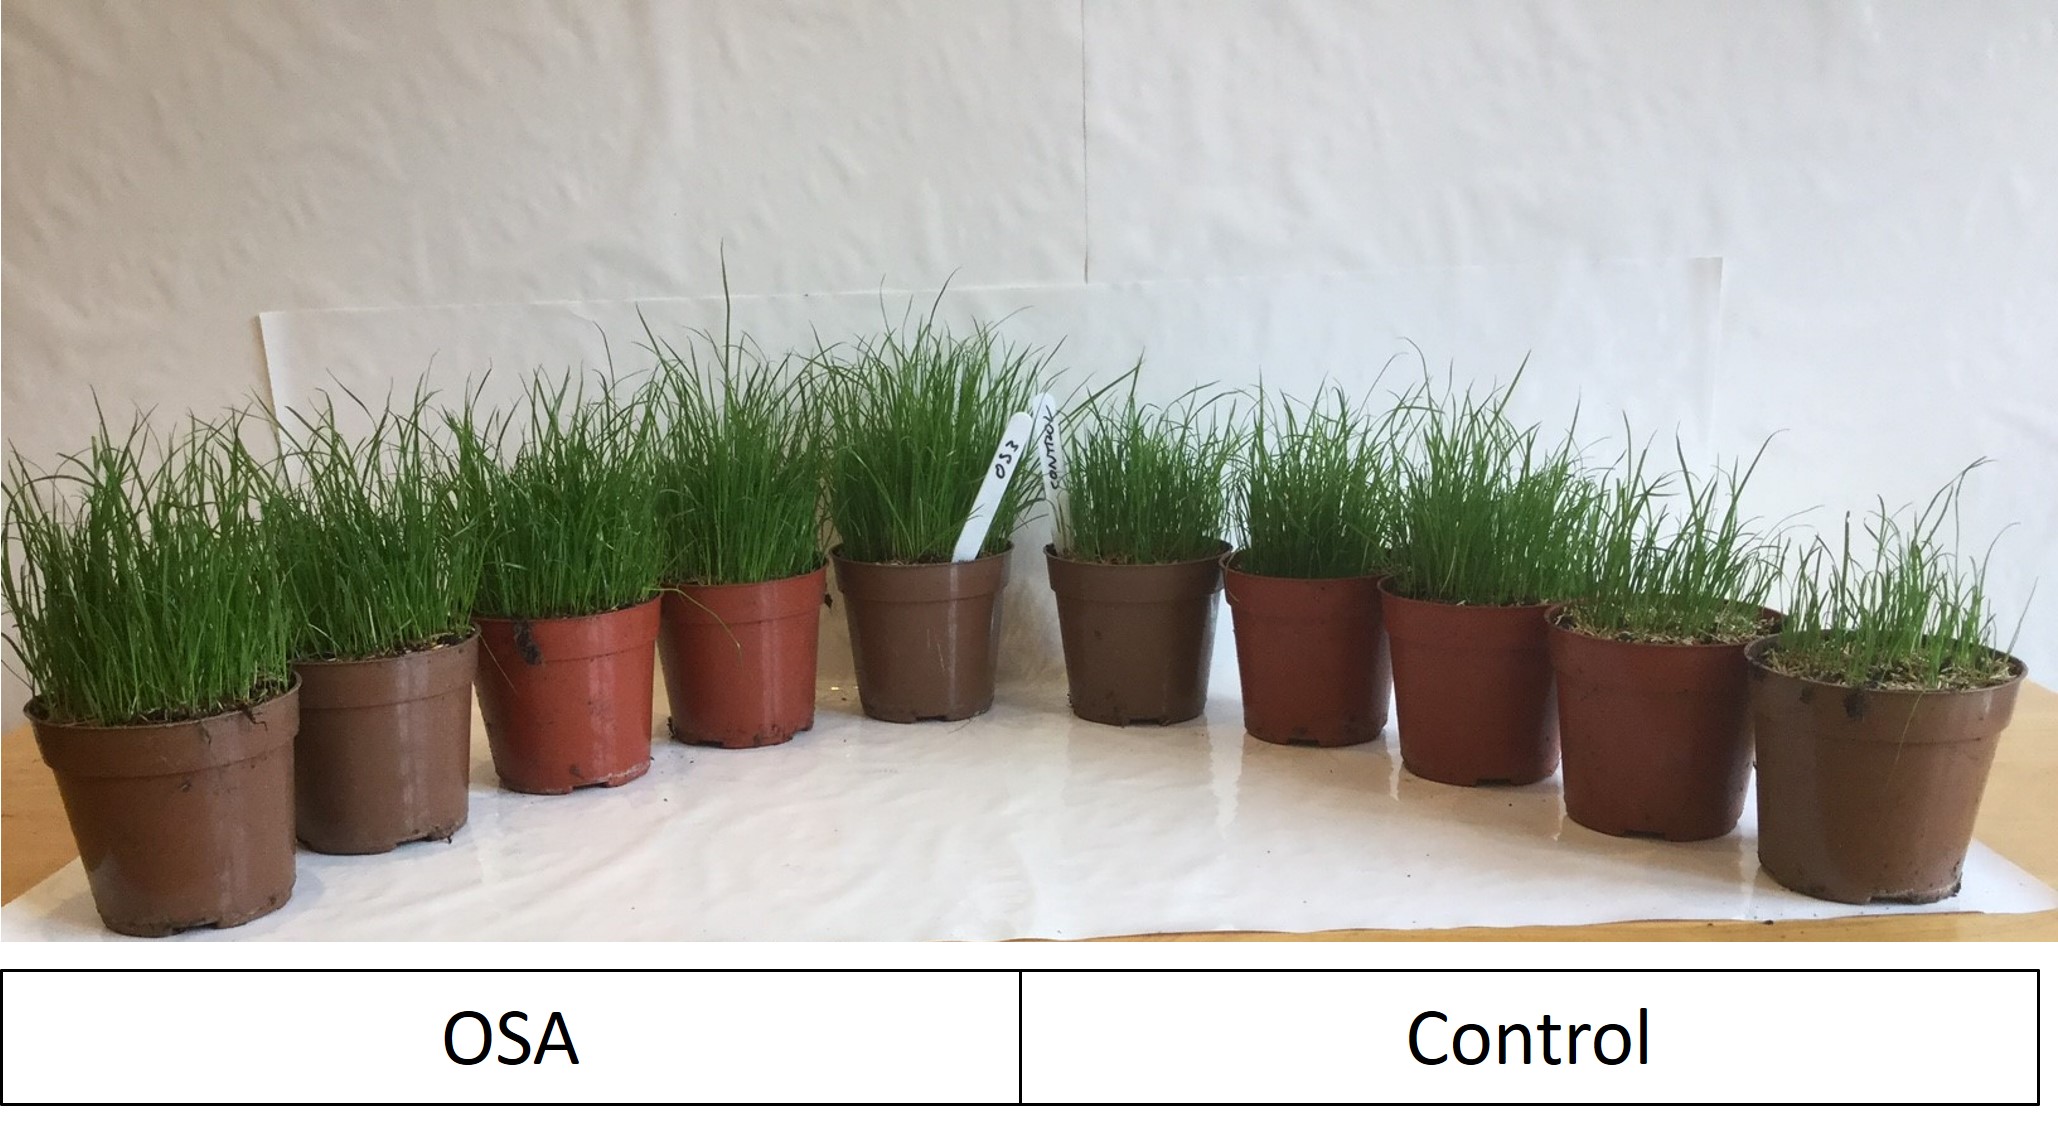 10 samples of rye grass, 5 of which have been treated with Aorthosilicic acid